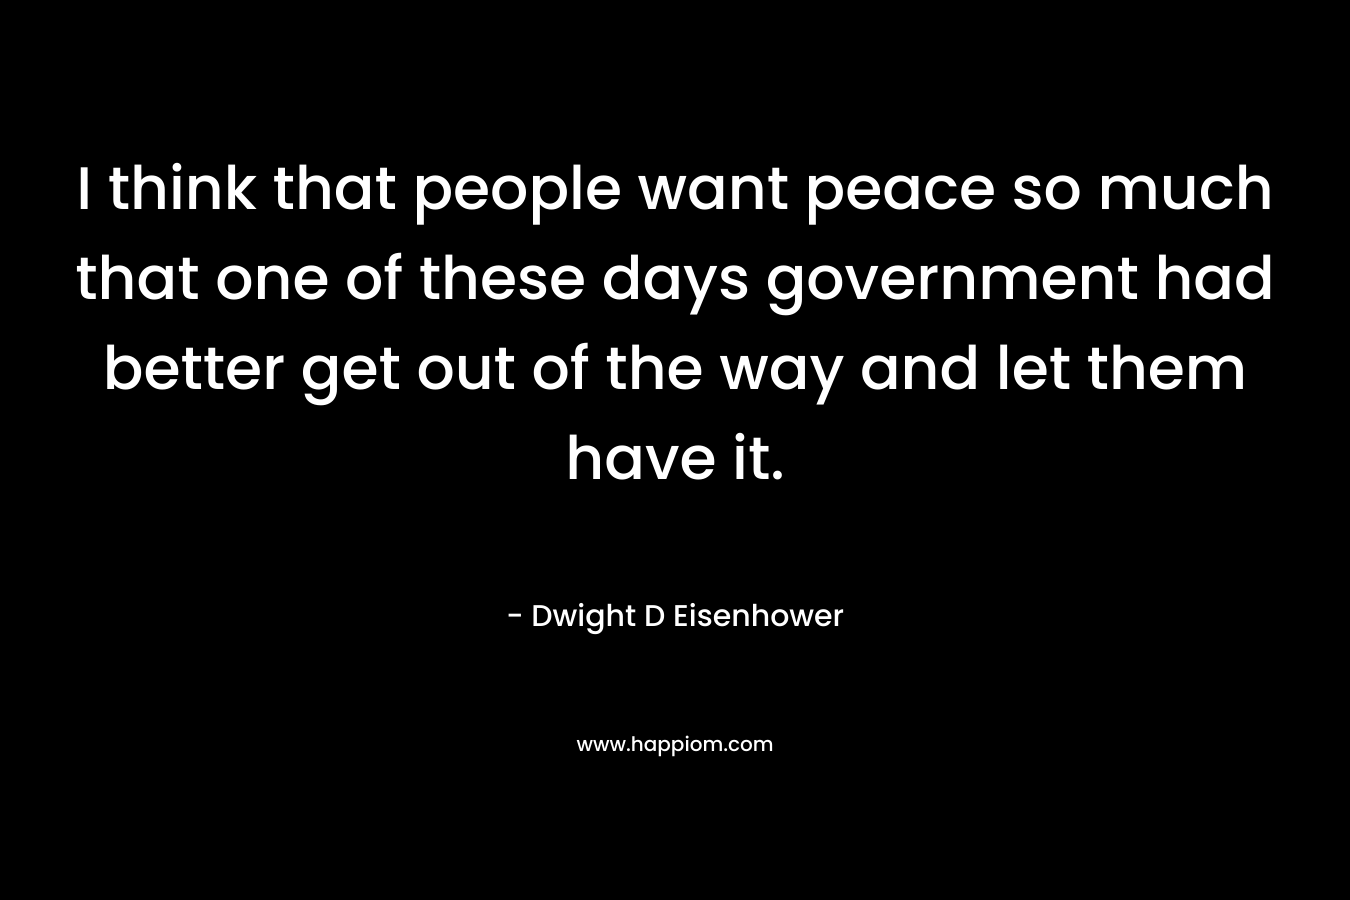 I think that people want peace so much that one of these days government had better get out of the way and let them have it. – Dwight D Eisenhower